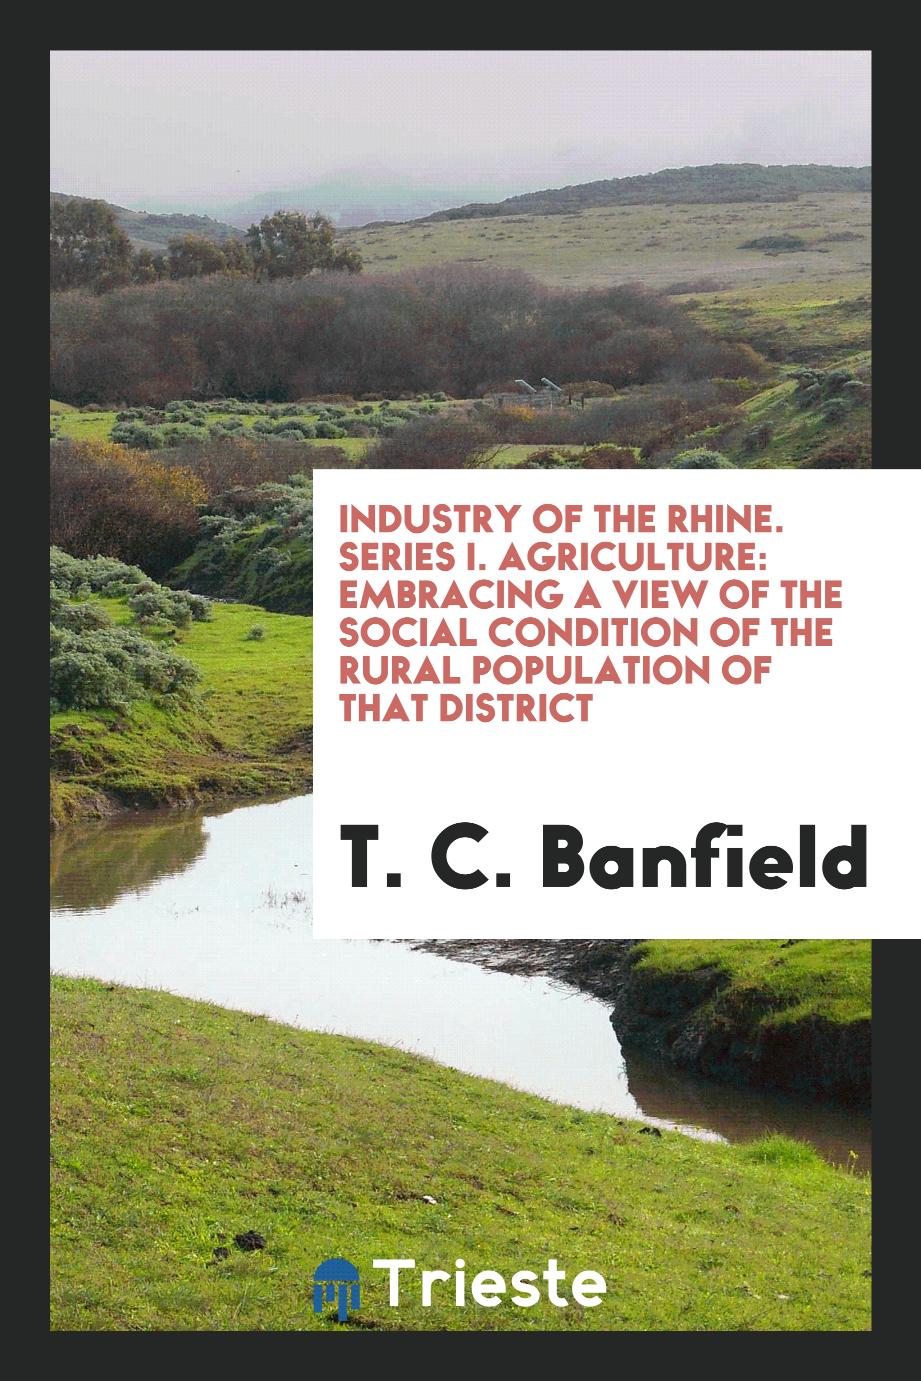 Industry of the Rhine. Series I. Agriculture: embracing a view of the social condition of the rural population of that district